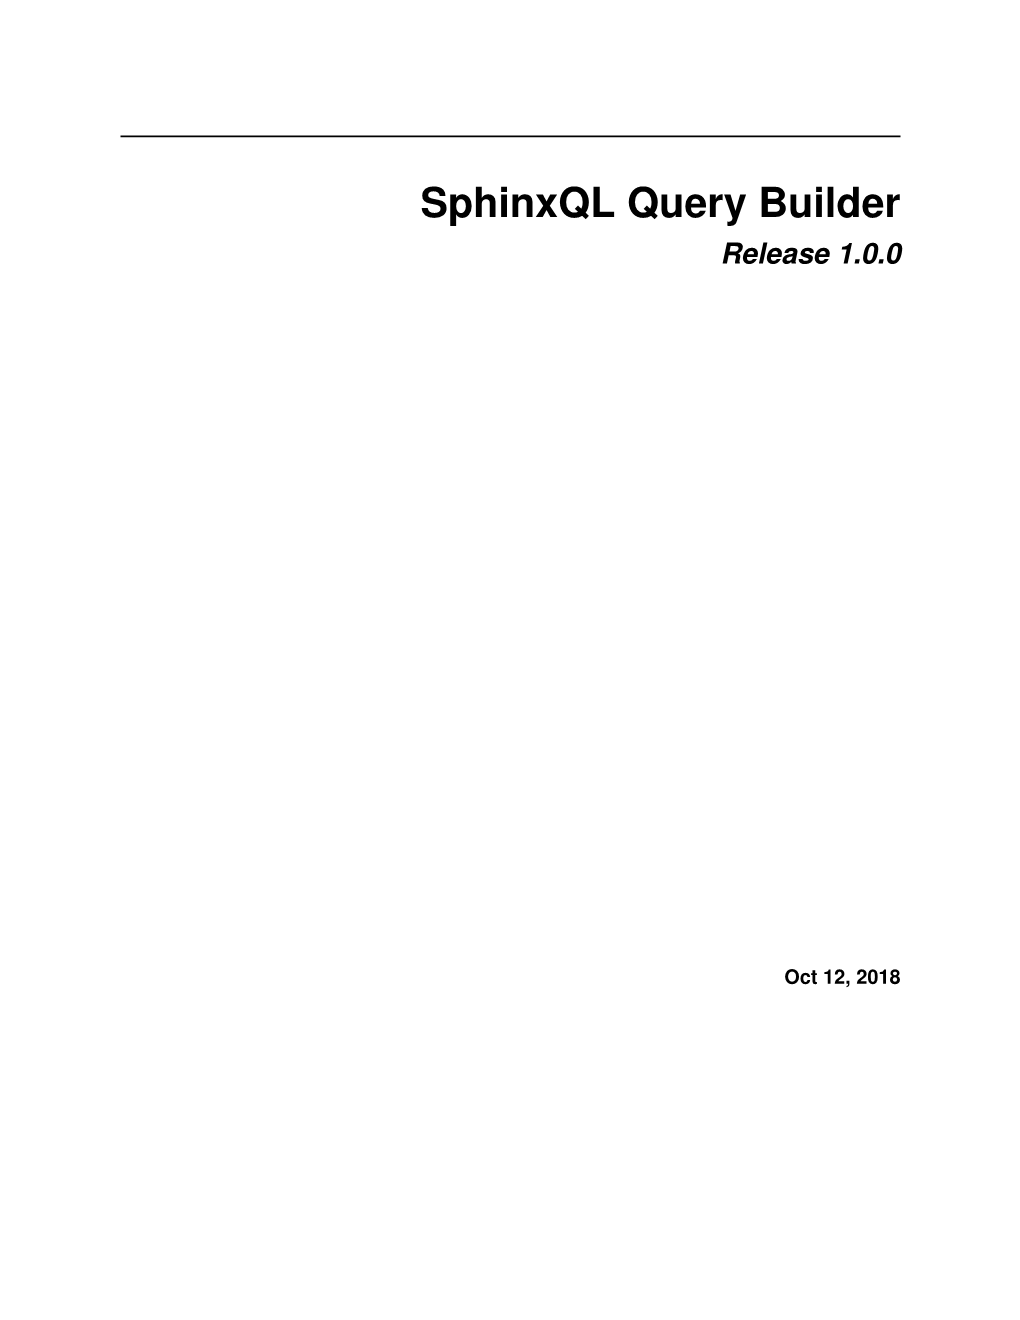 Sphinxql Query Builder Release 1.0.0